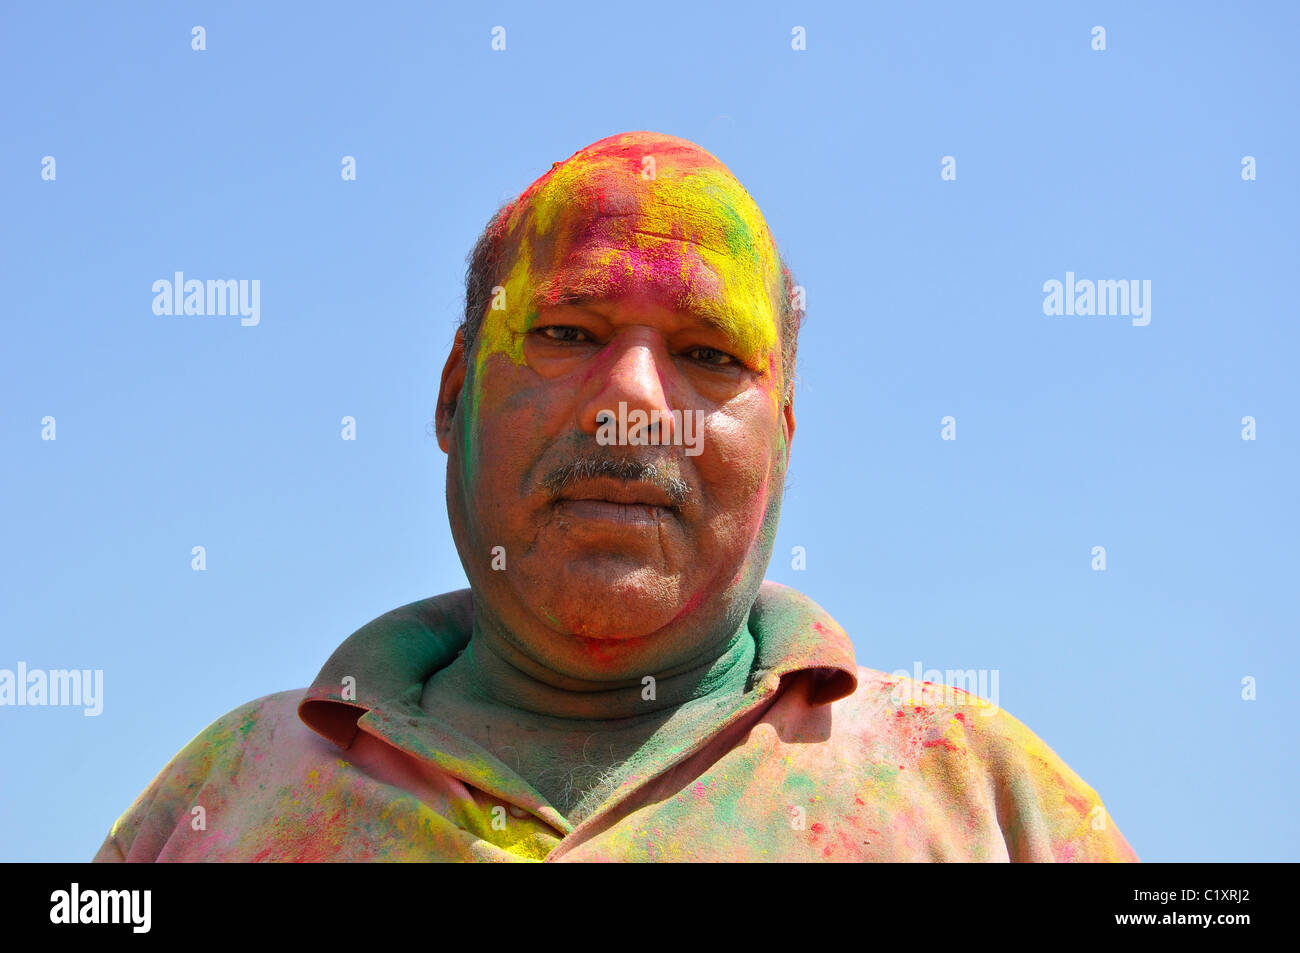 One Indian with colors on his face- Holi celebration Stock Photo